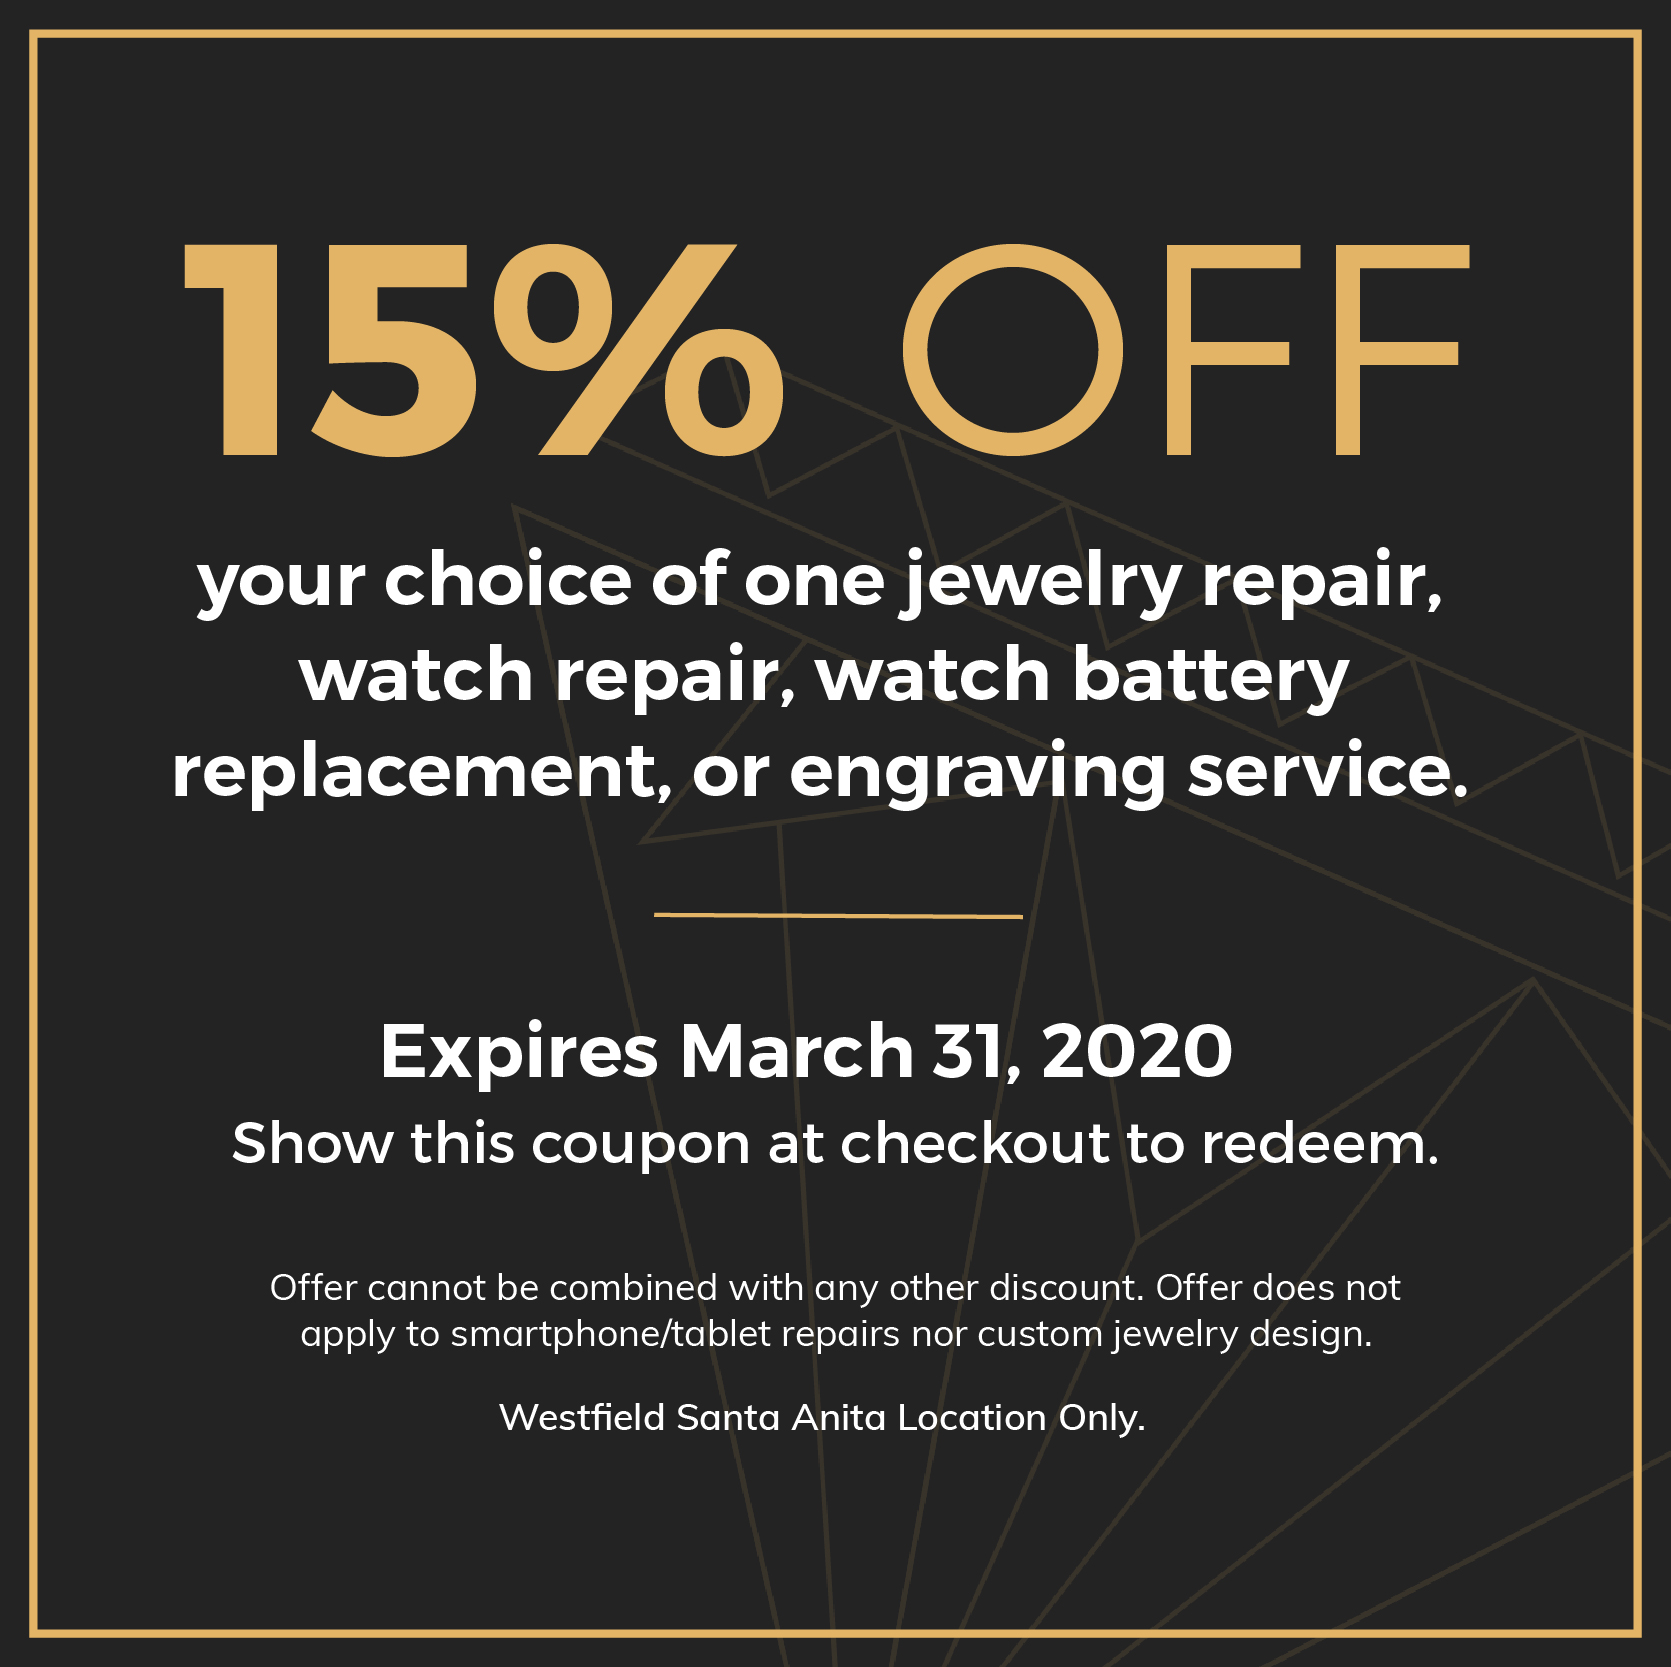 15% OFF. your choice of one jewelry repair, watch repair, watch battery replacement, or engraving service. Expires March 31, 2020. Show this coupon at checkout to redeem. Offer cannot be combined with any other discount. Offer does not apply to smartphone/tablet repairs nor custom jewelry design. Westfield Santa Anita Location Only.